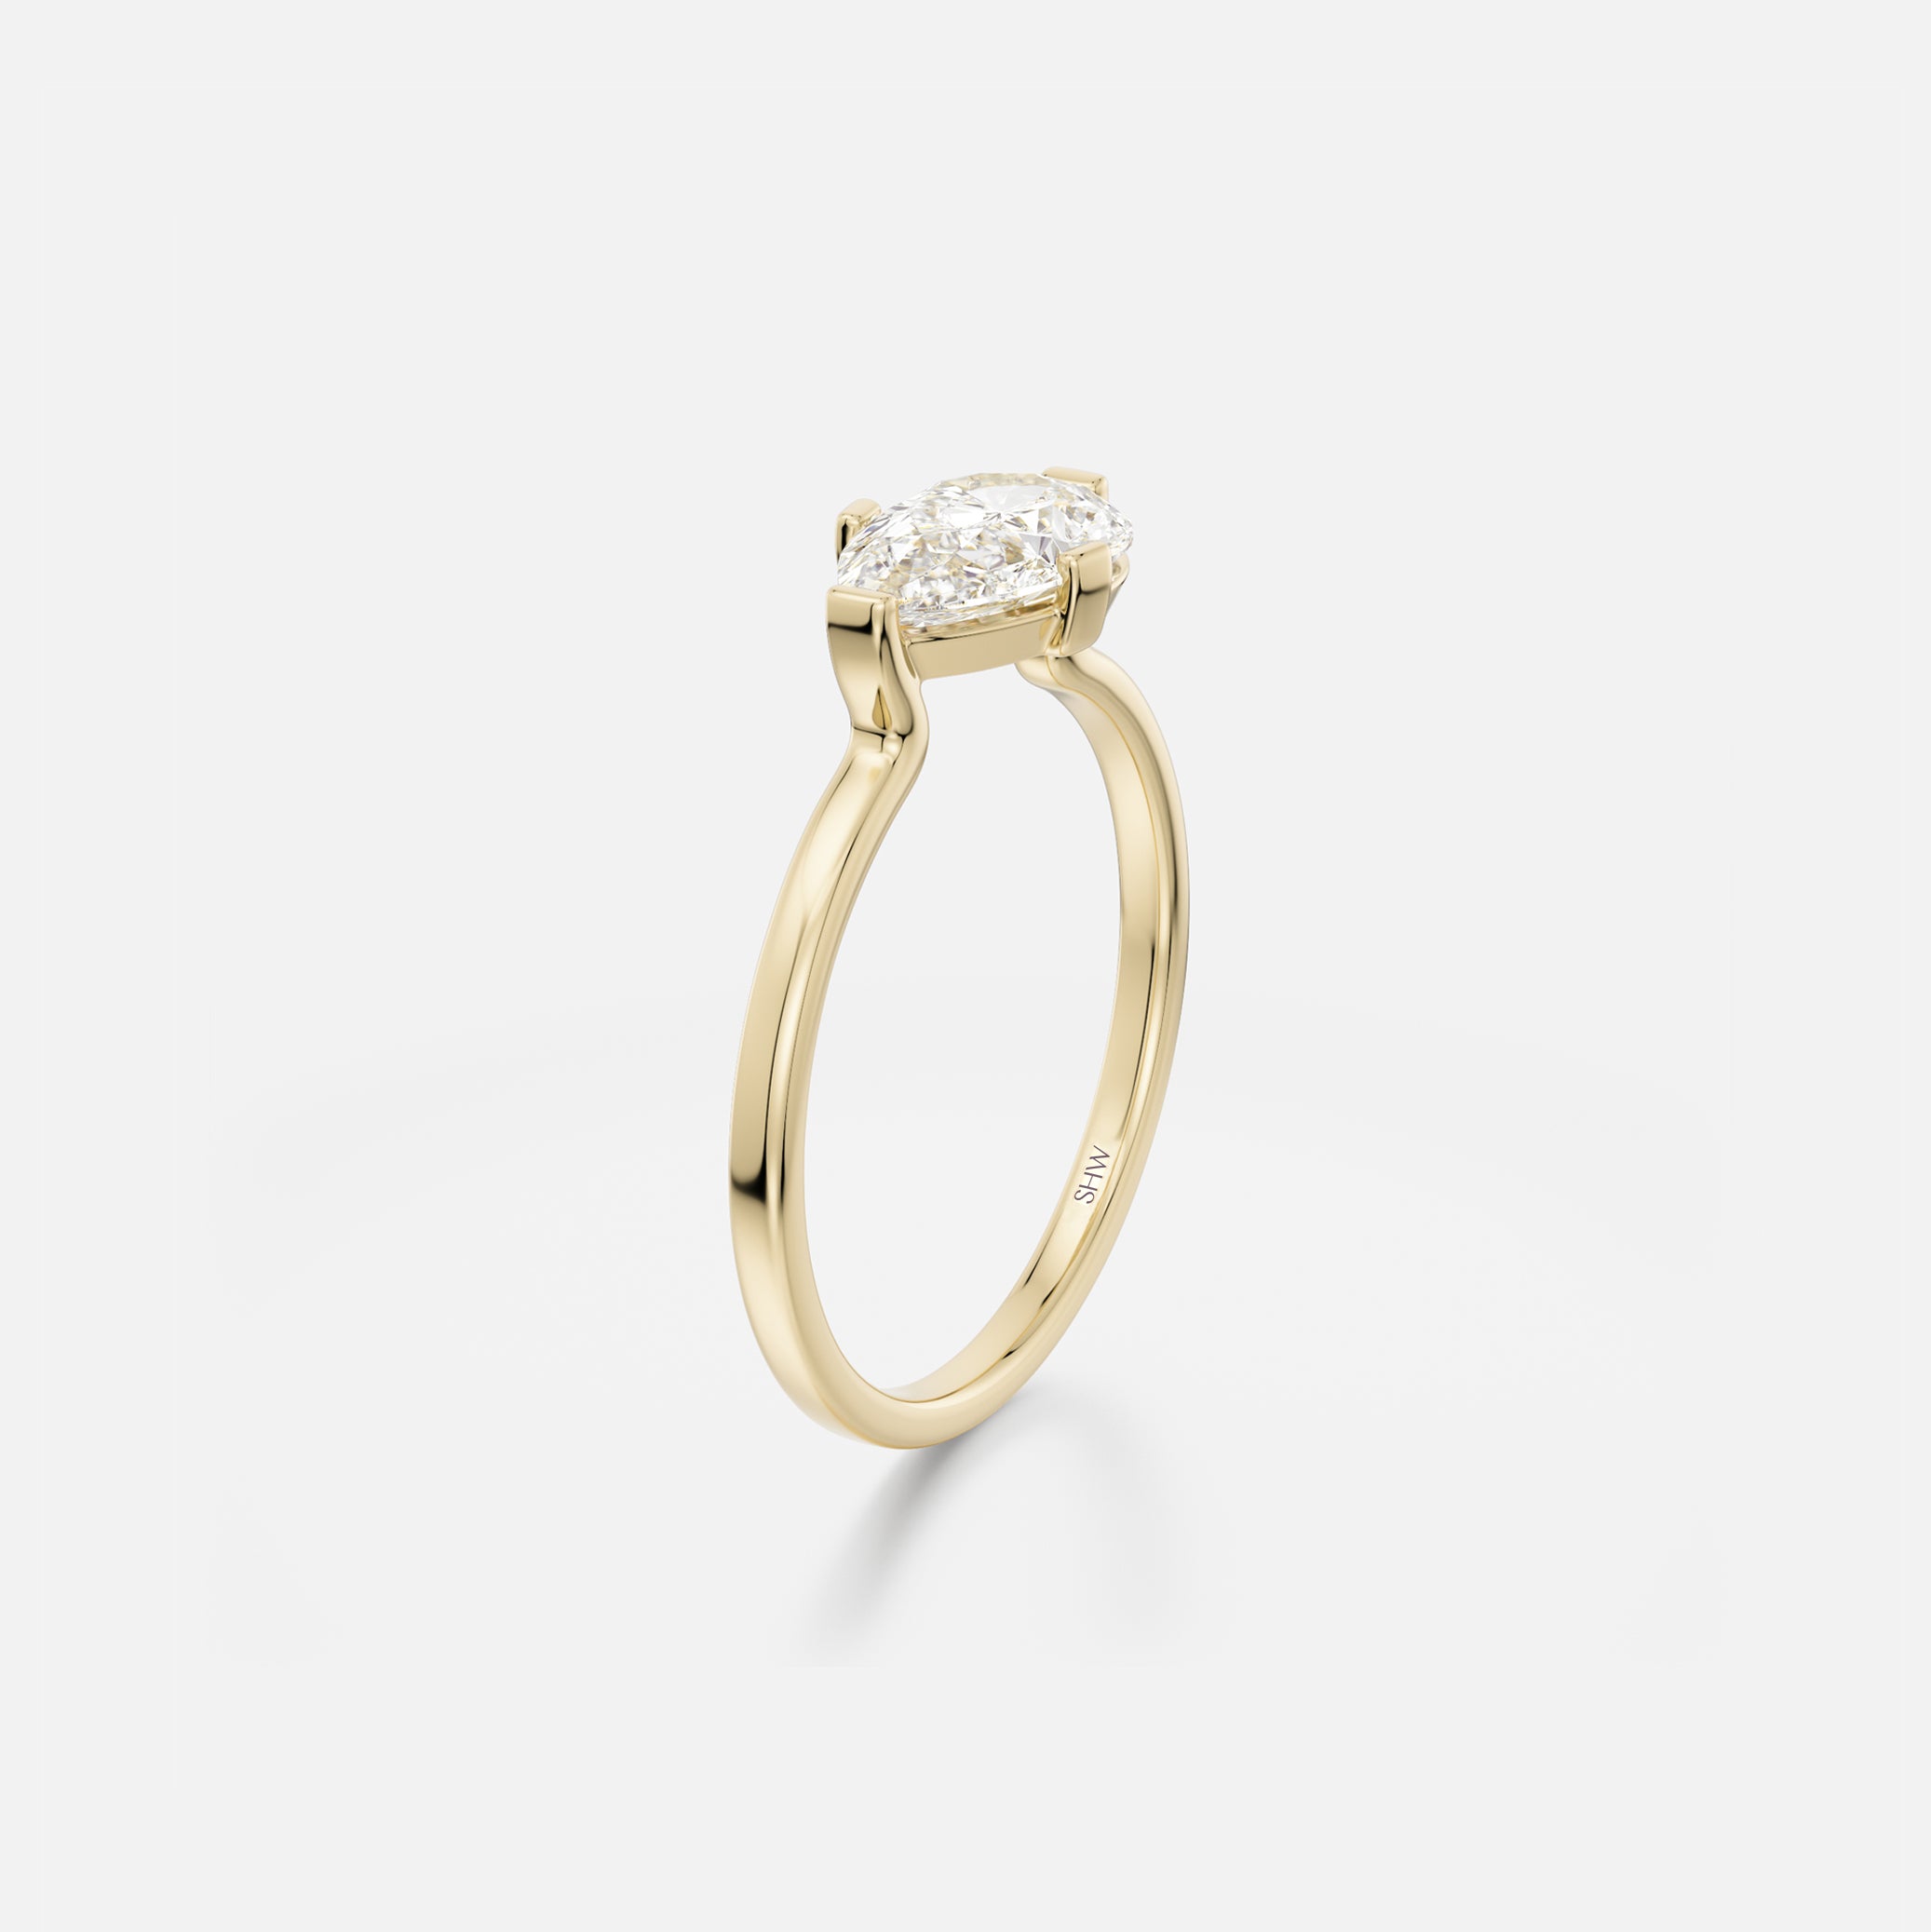 Ema Flat Band with East West Pear Minimalist Engagement Ring Setting handmade by SHW Fine Jewelry New York City